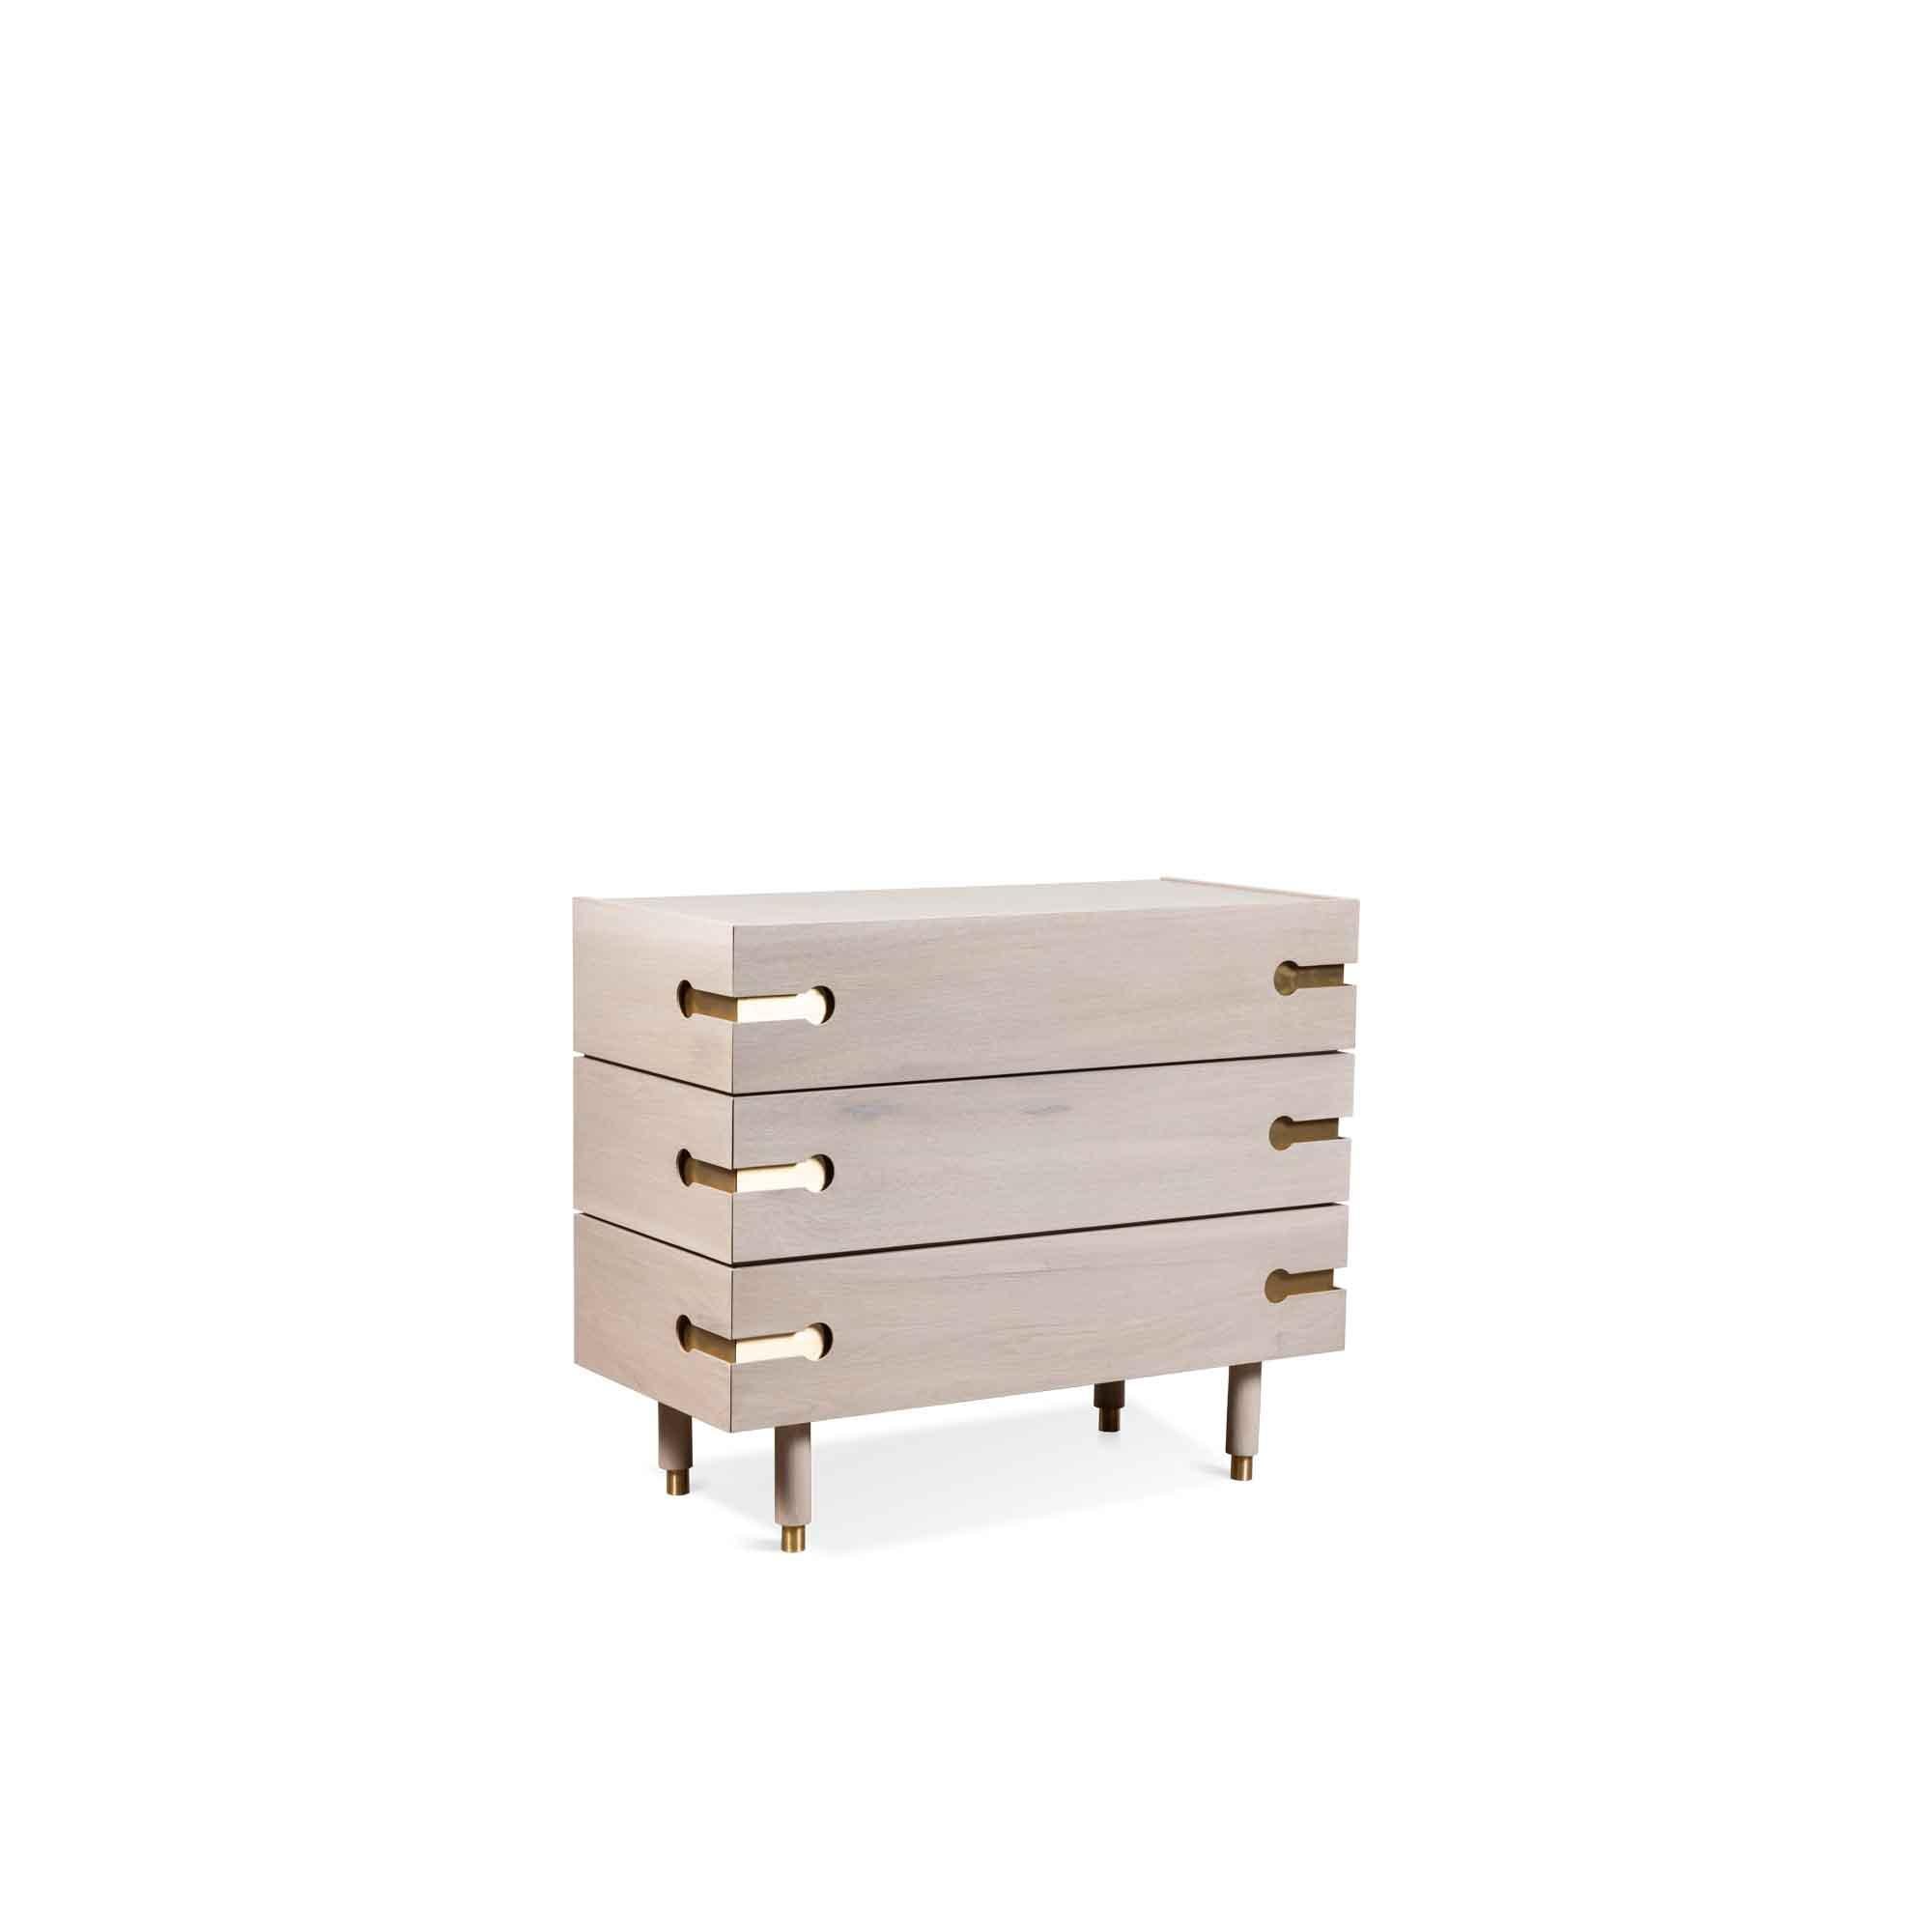 The Niguel dresser features 3 drawers, brass cap feet, and brass inlaid details.

The Lawson-Fenning Collection is designed and handmade in Los Angeles, California. Reach out to discover what options are currently in stock.